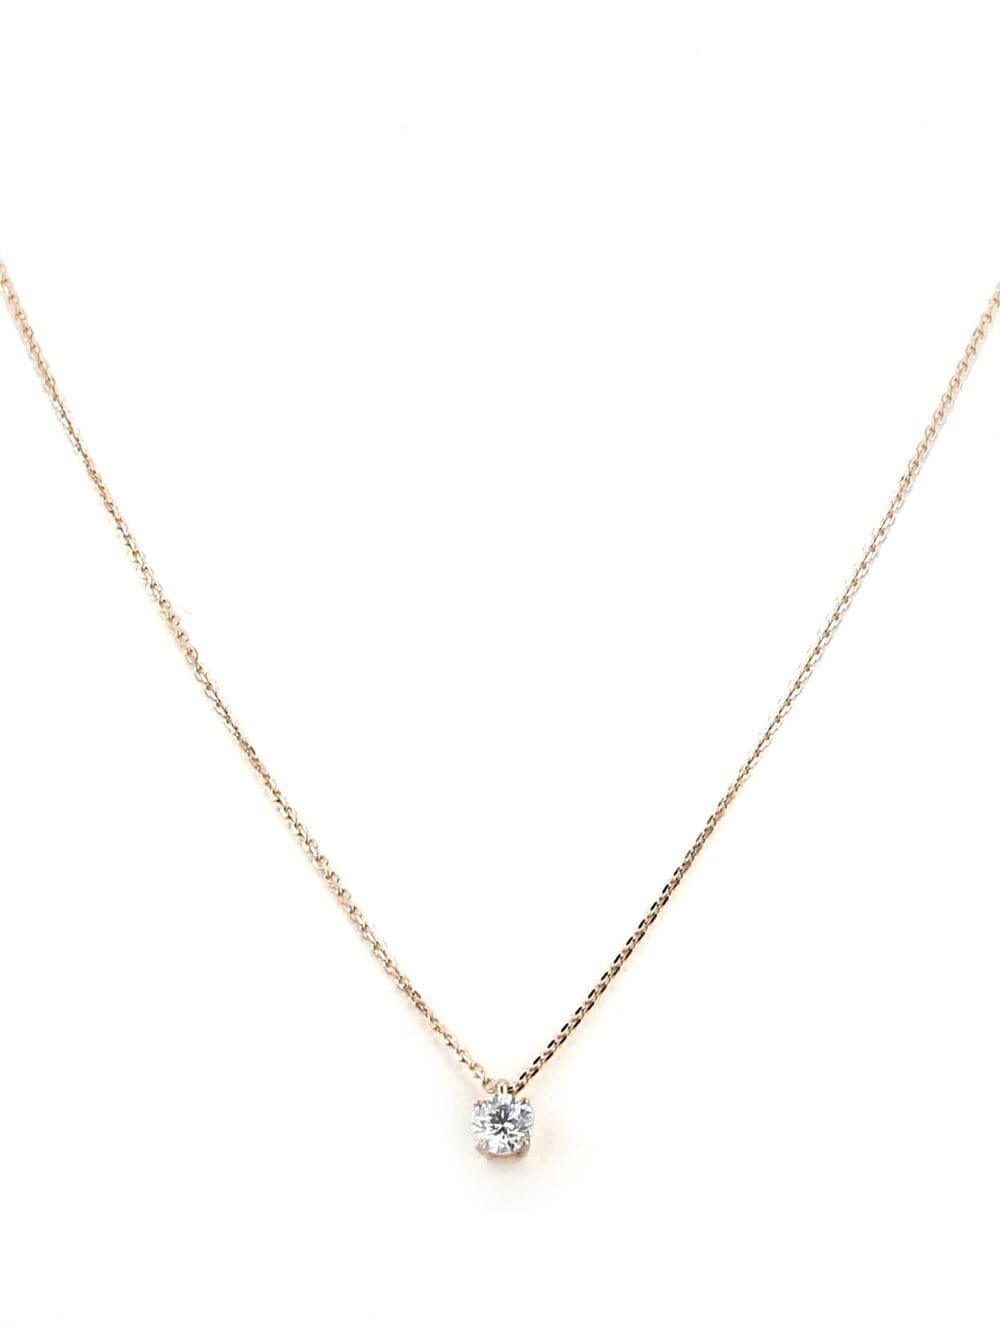 Atelier Collector Square pre-owned rose gold diamond chain necklace